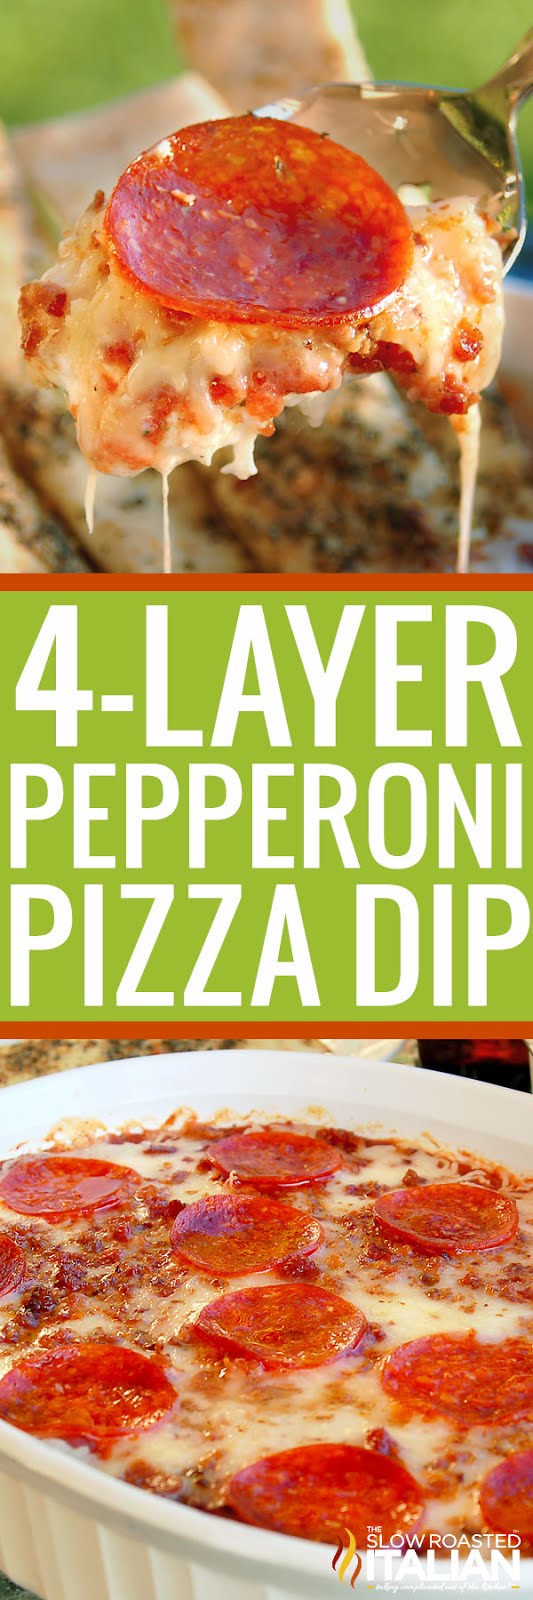 4-Layer Pizza Dip (With VIDEO)